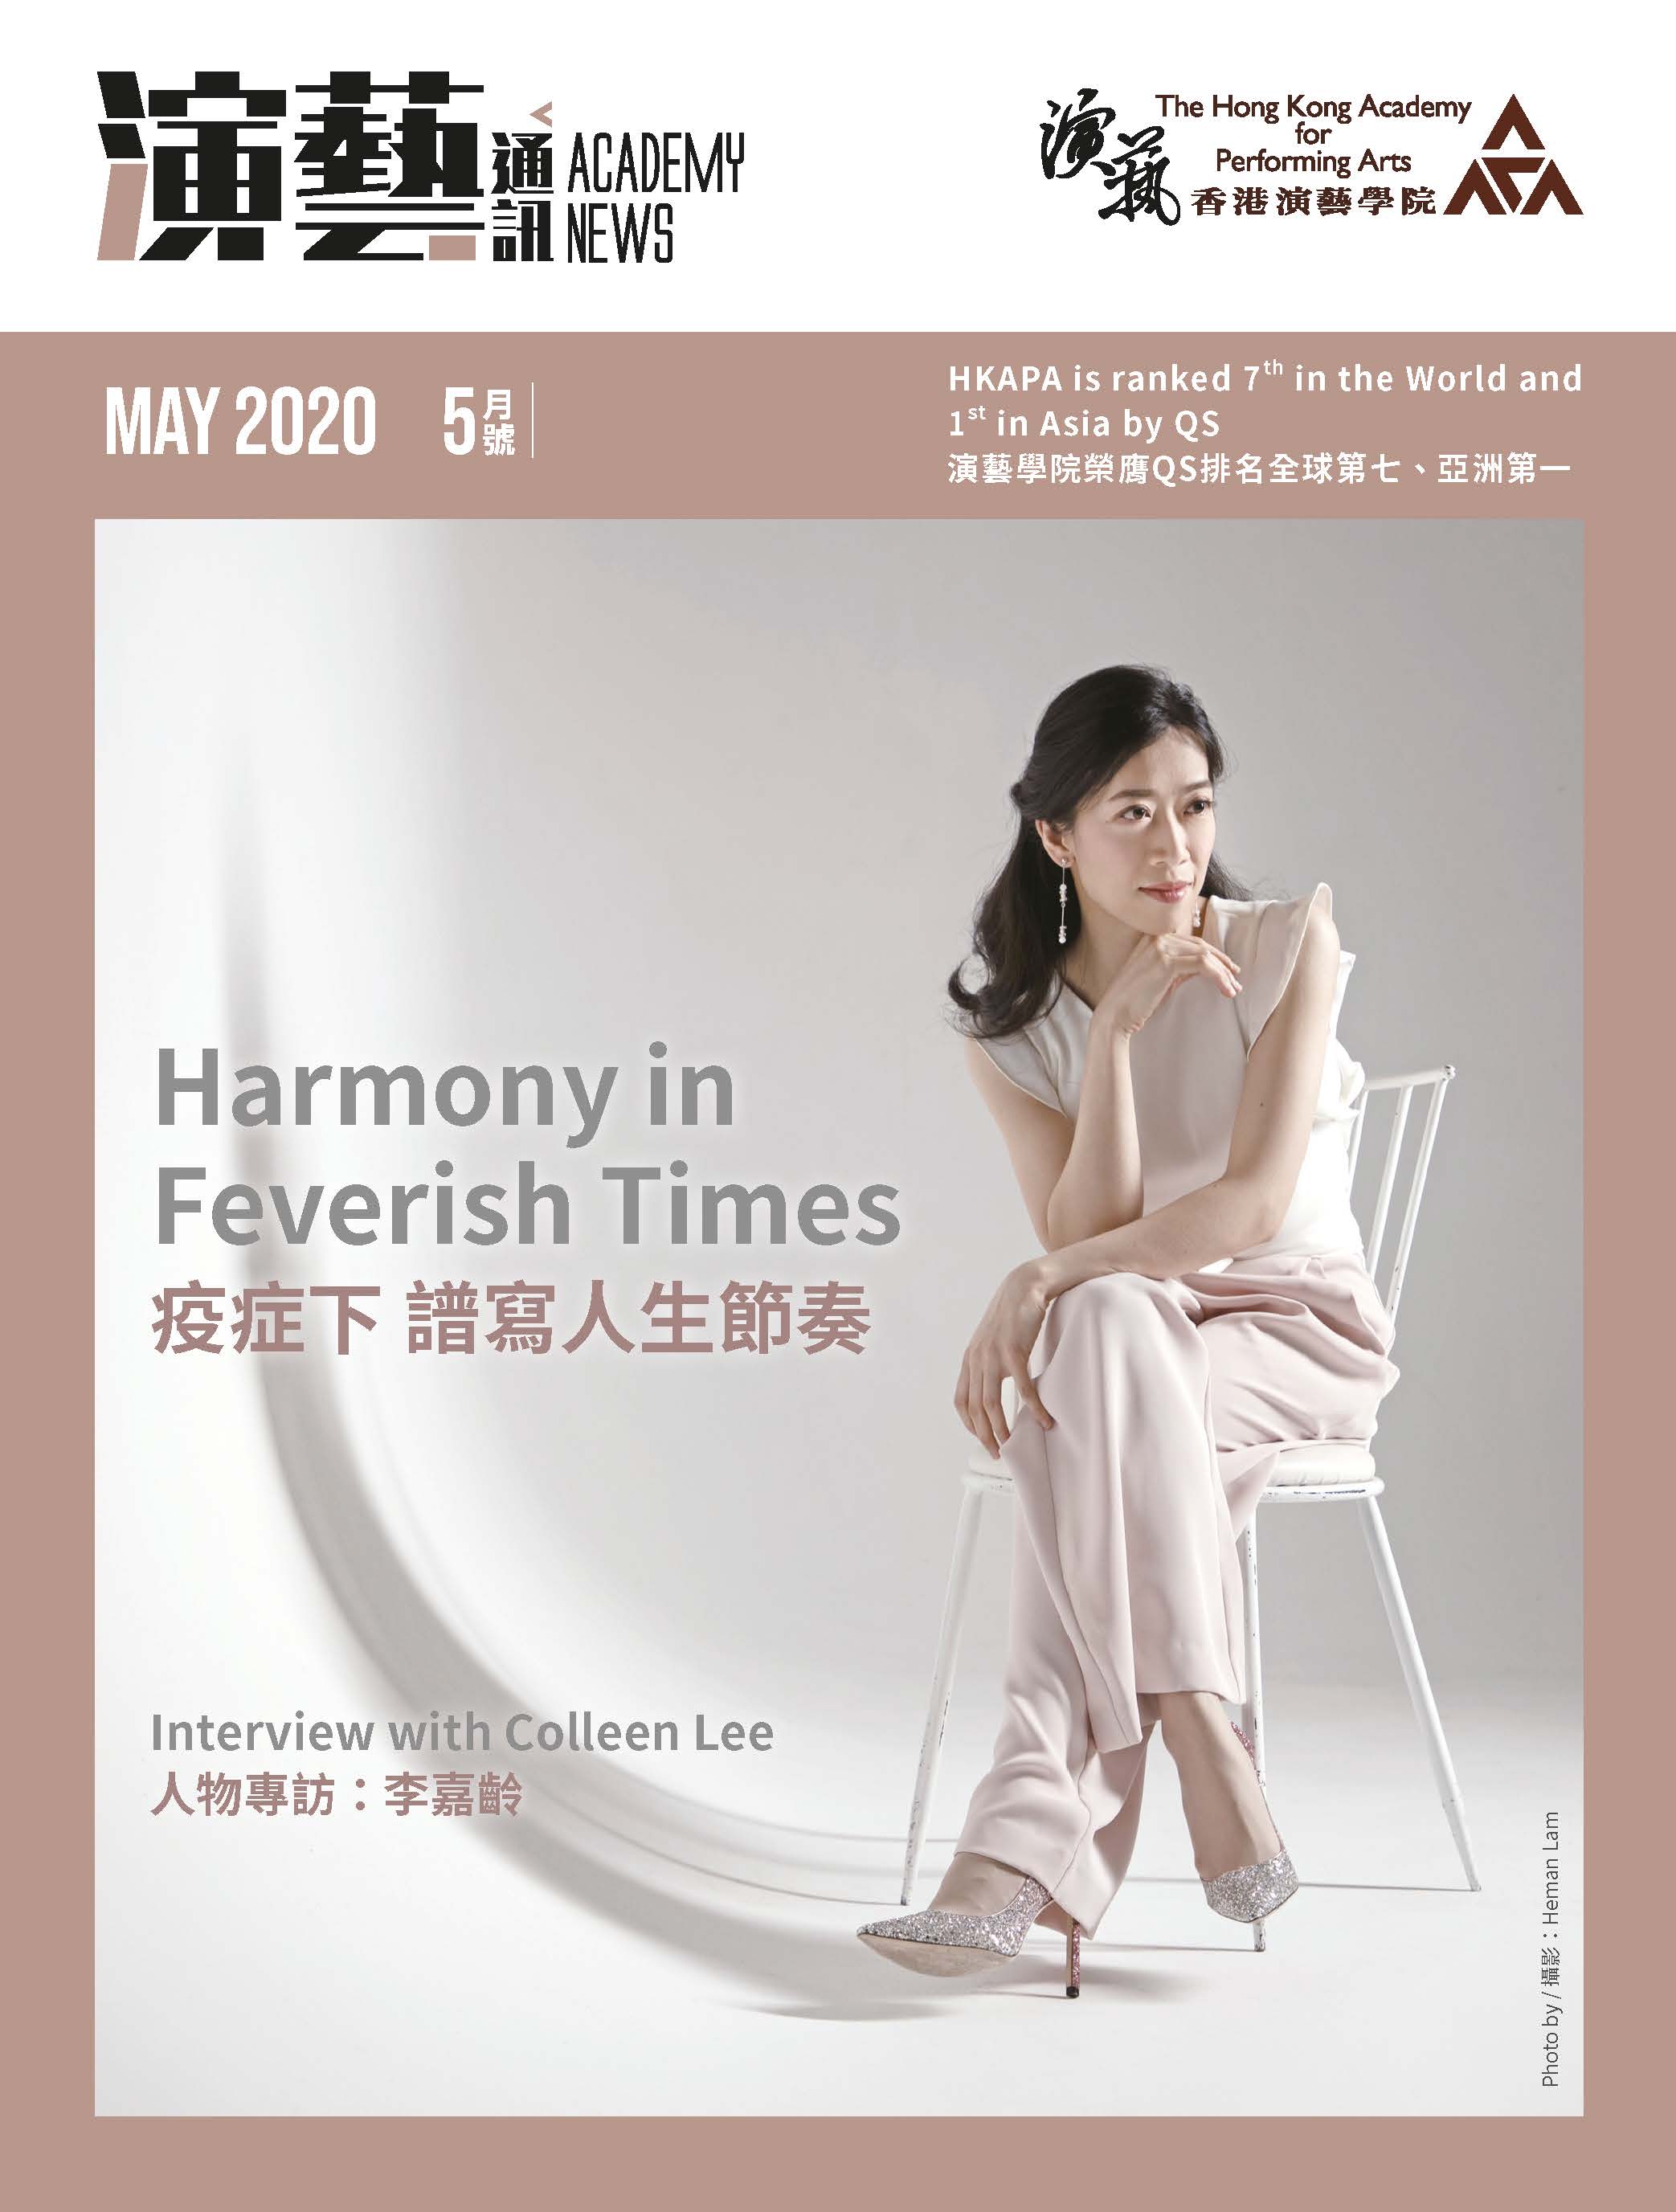 May 2020 issue